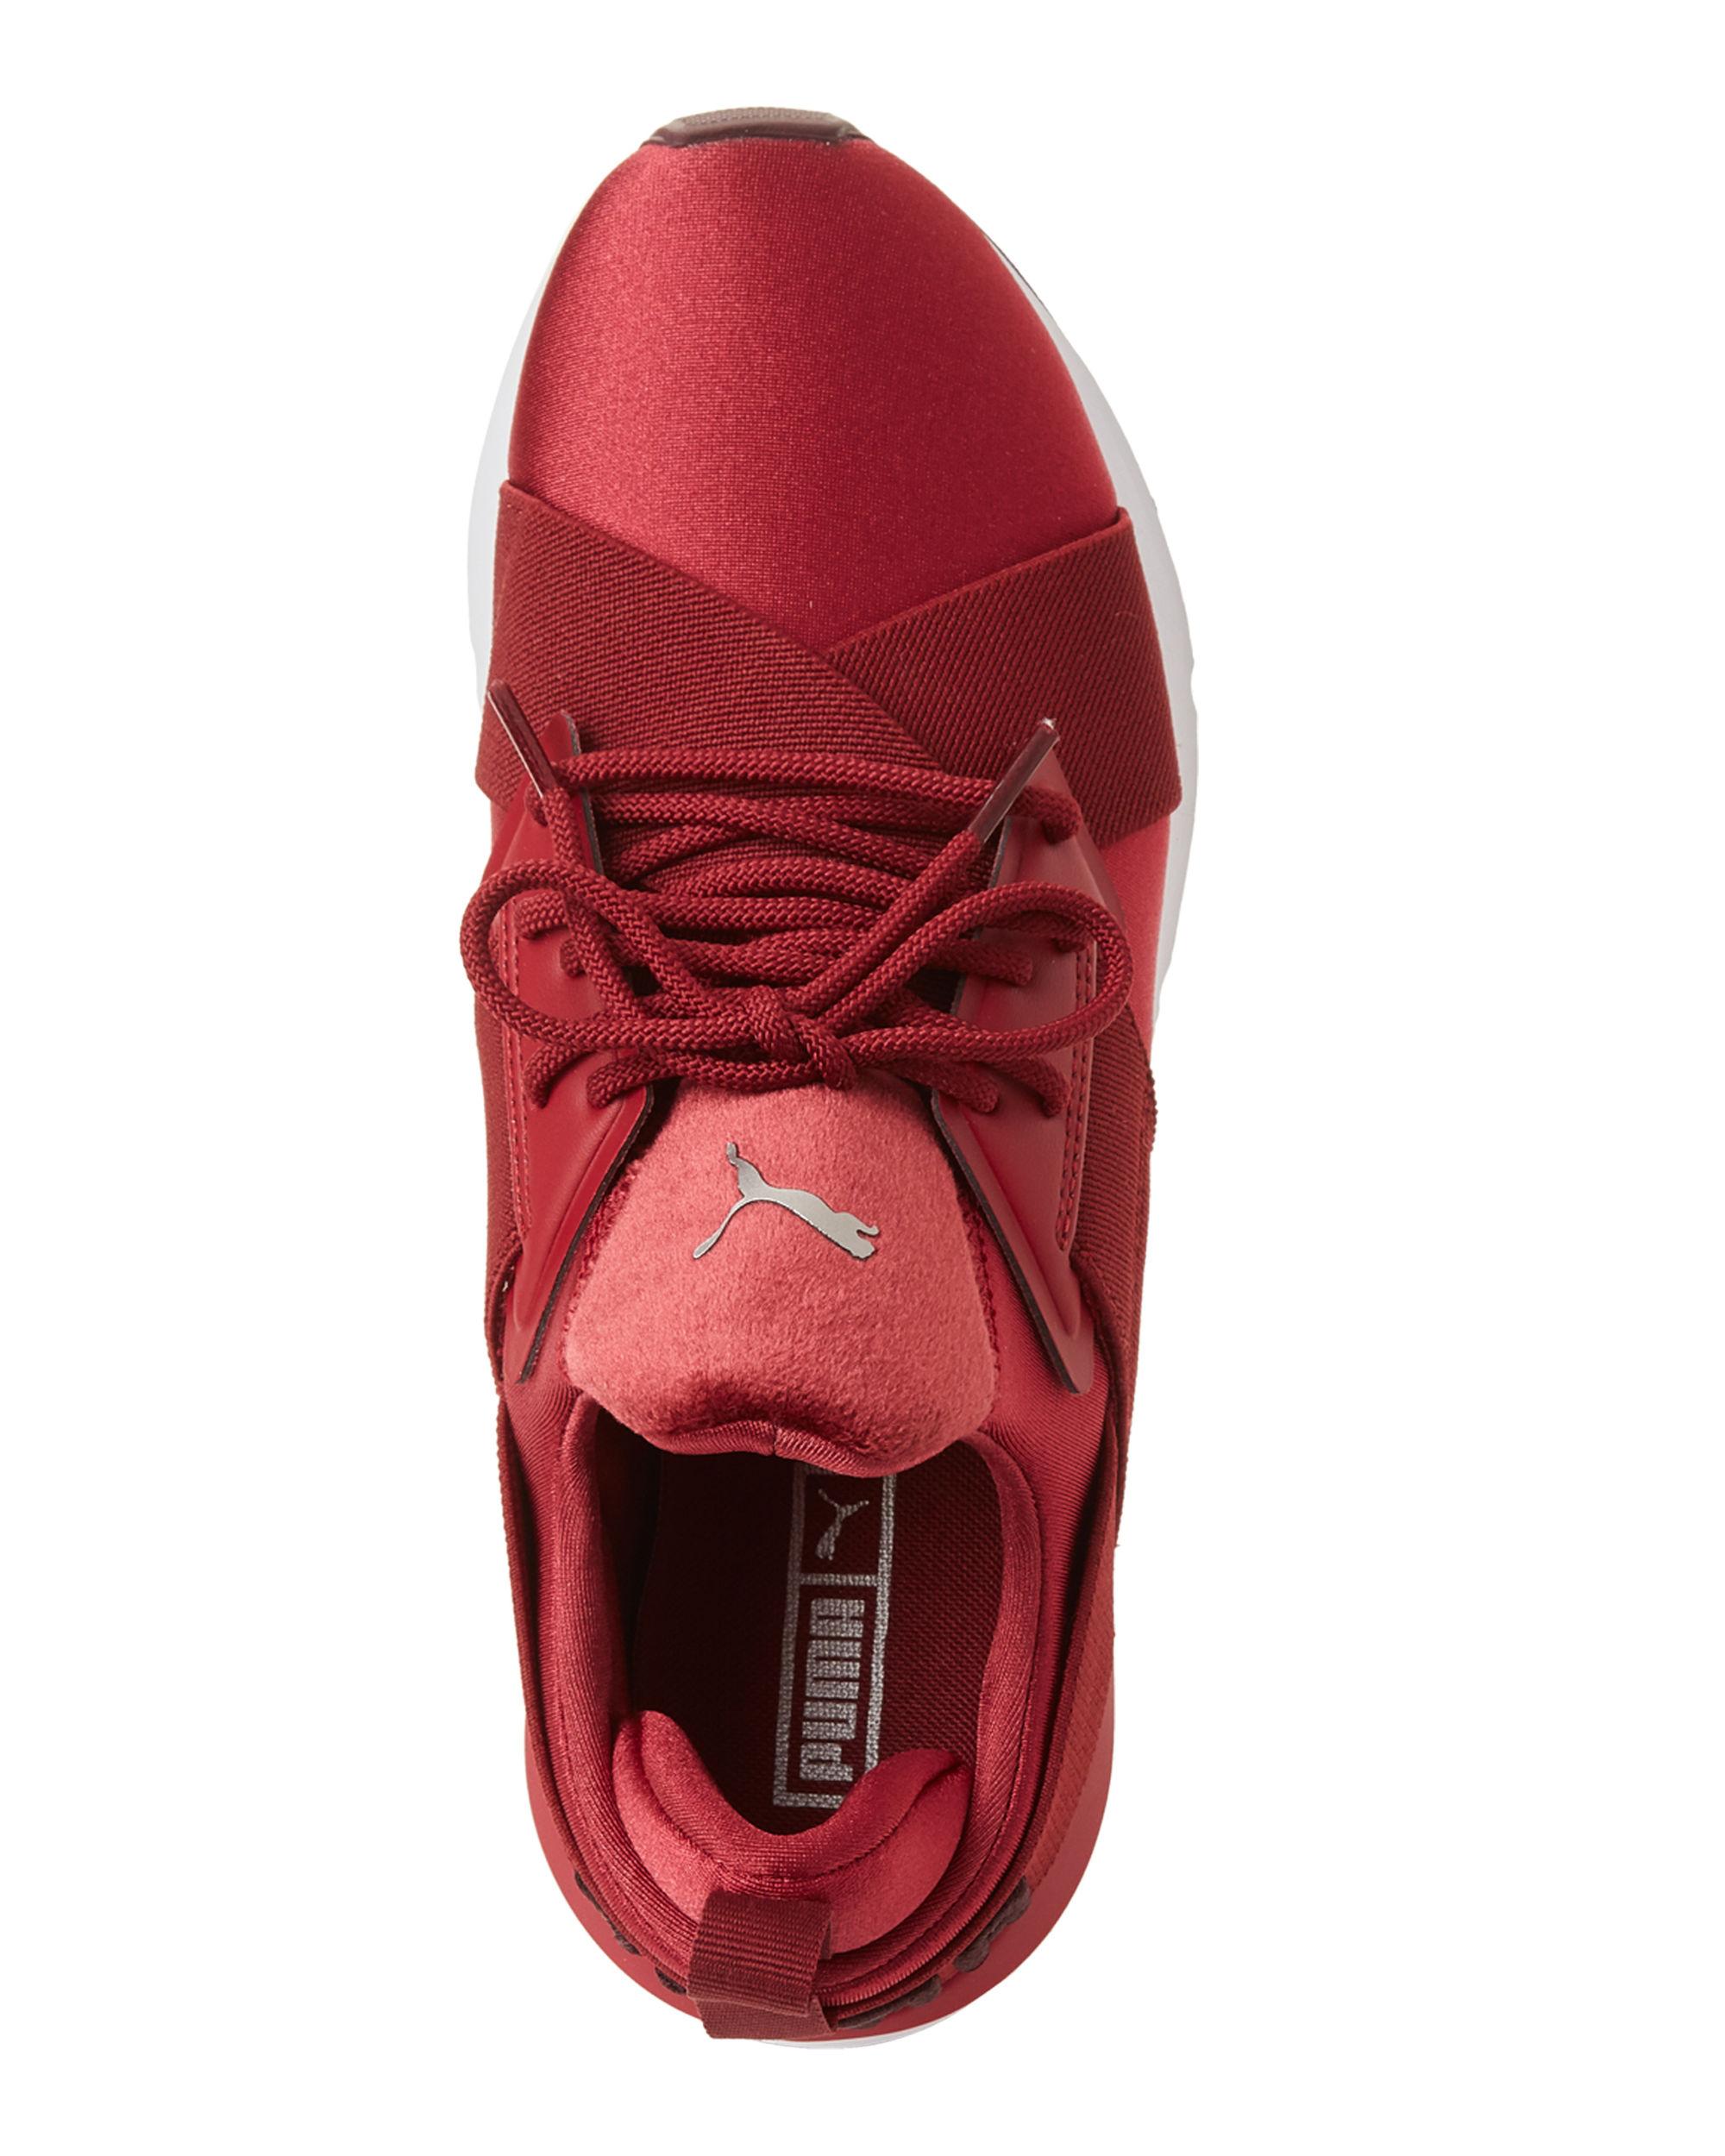 PUMA Pomegranate Muse Satin Sneakers in 